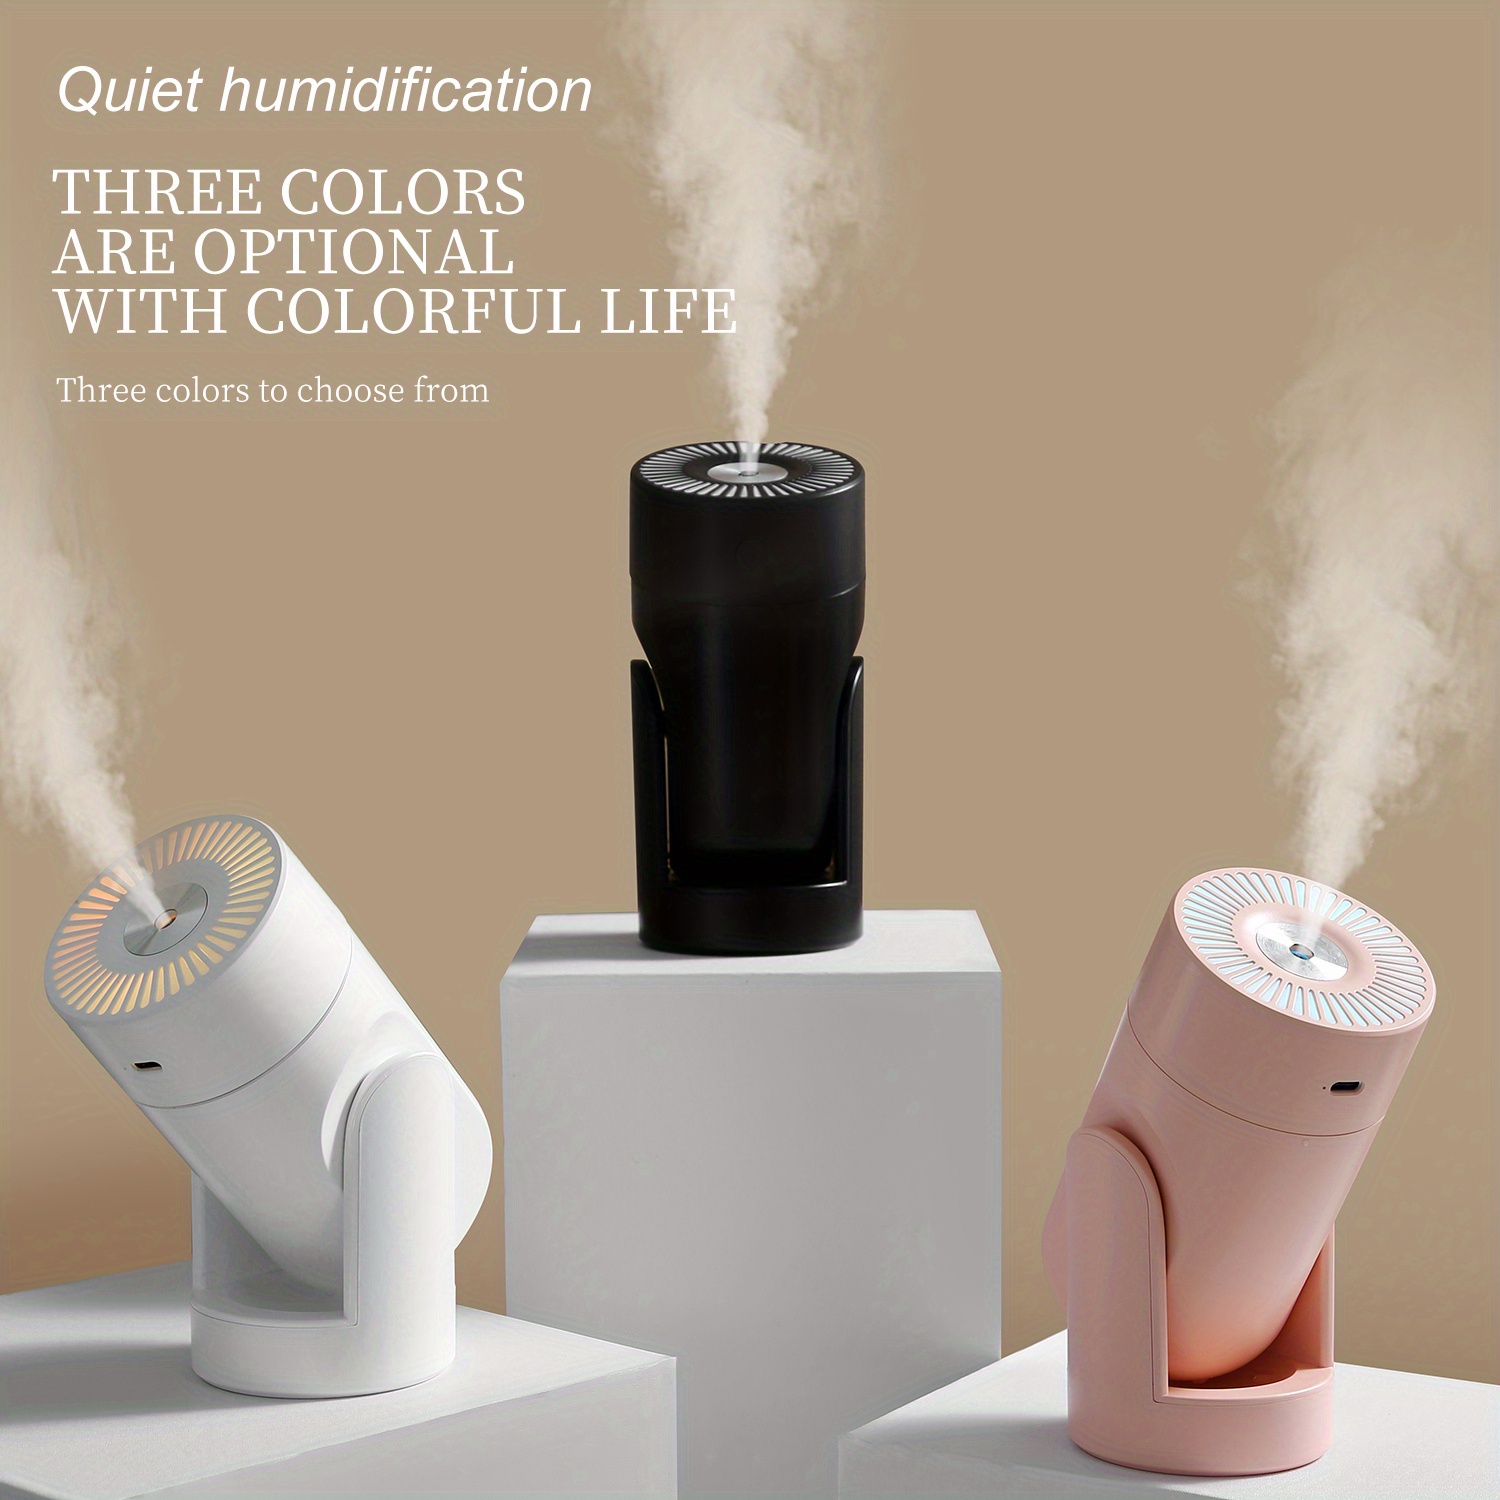 1pc 220ml adjustable angle shakable head humidifier 2 mist modes usb personal desktop humidifier for home office or yoga essential oil diffuser with no water auto off protection seven color light switch at will pink black white details 1